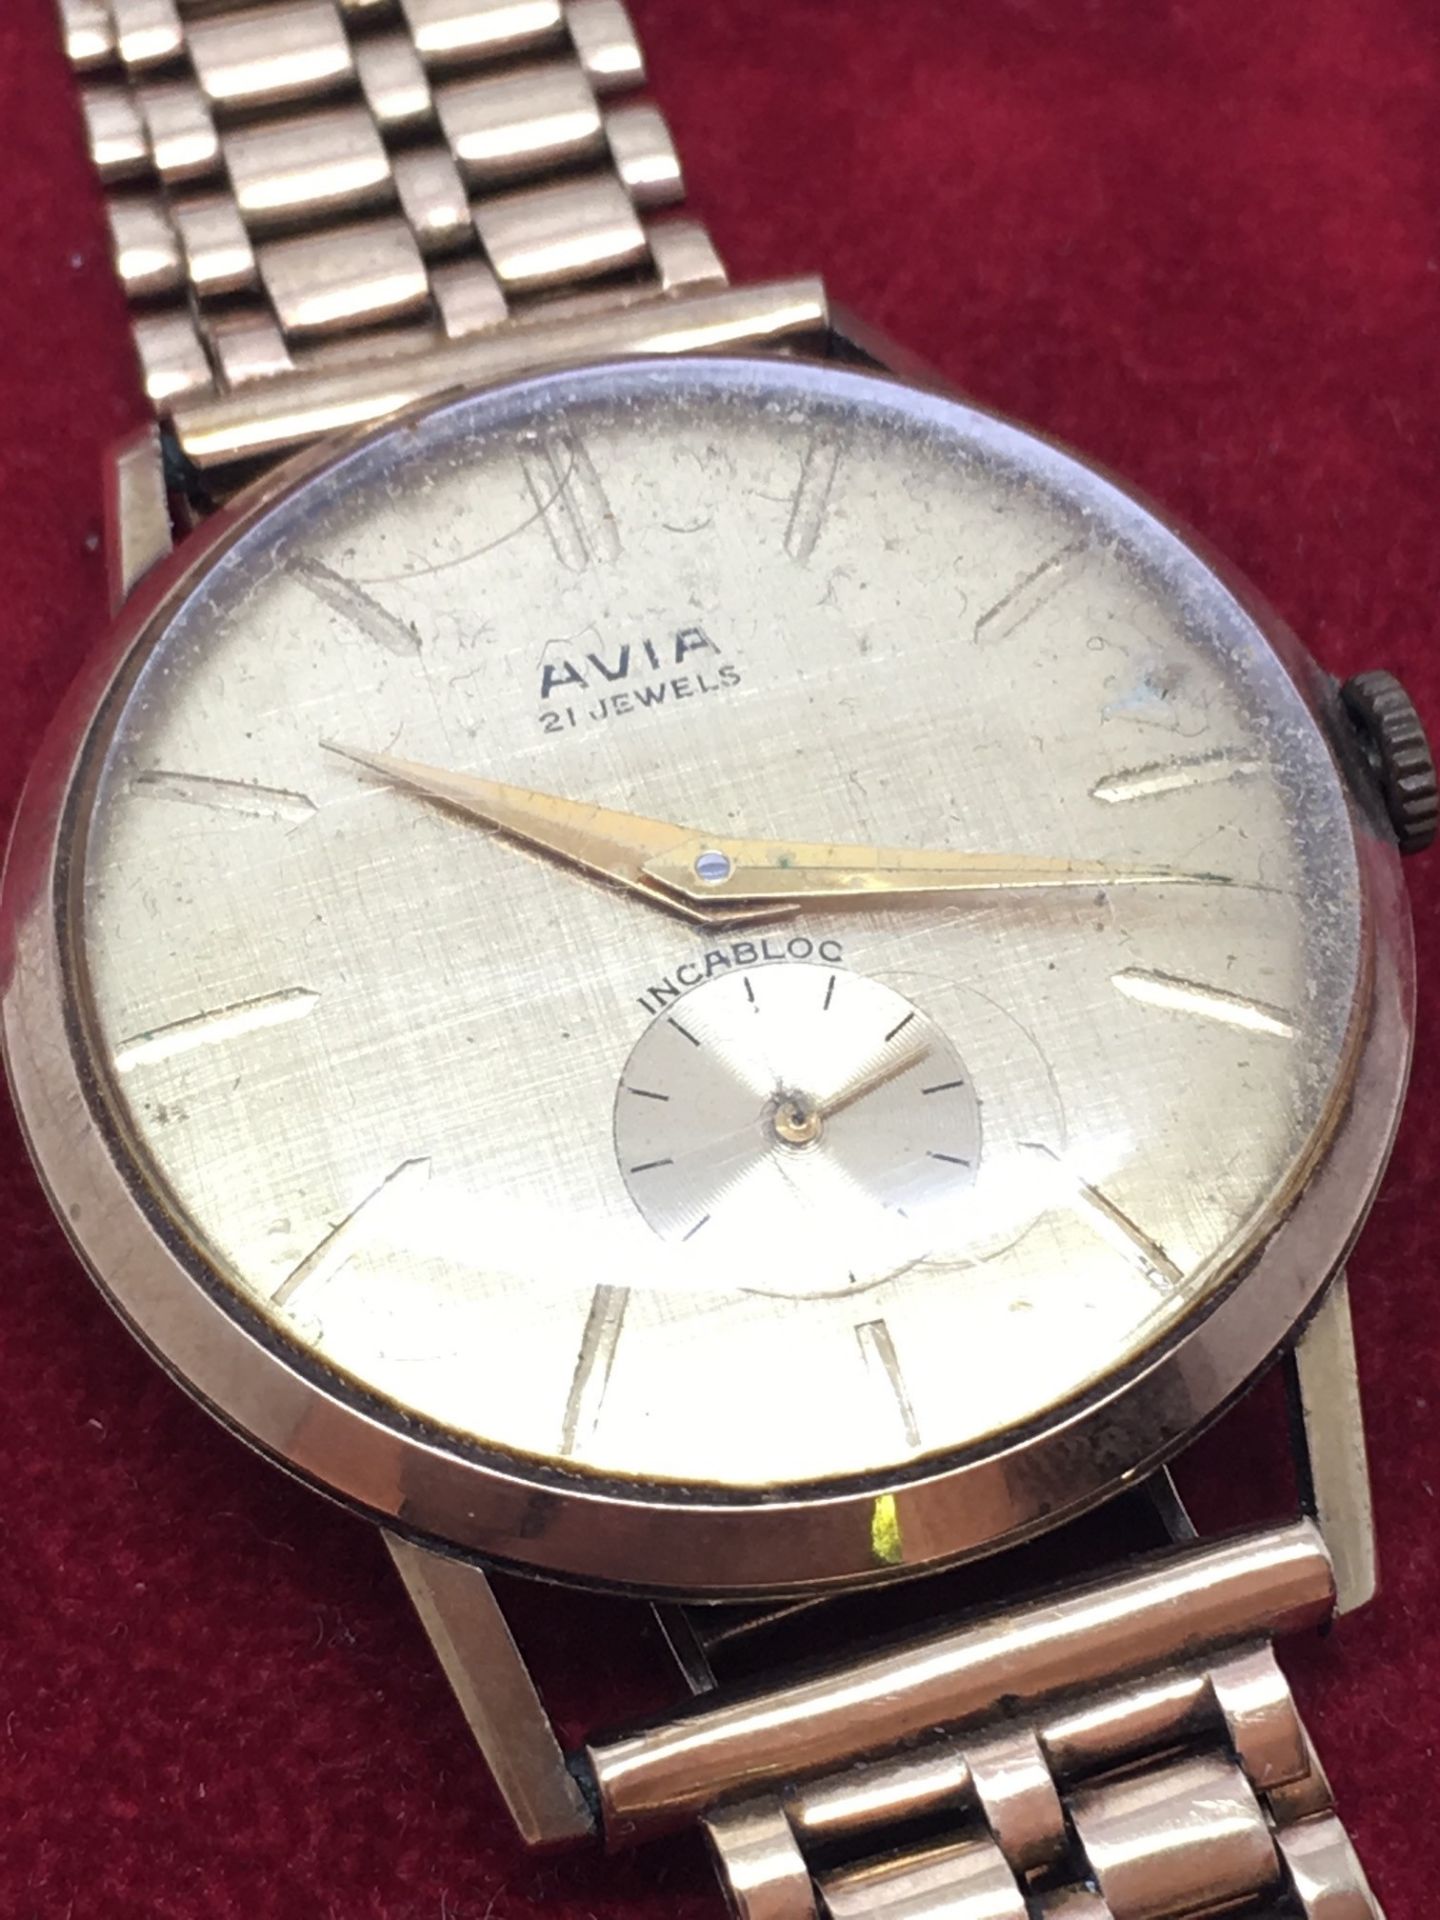 GENTS AVIA 9ct GOLD WATCH - Image 2 of 3